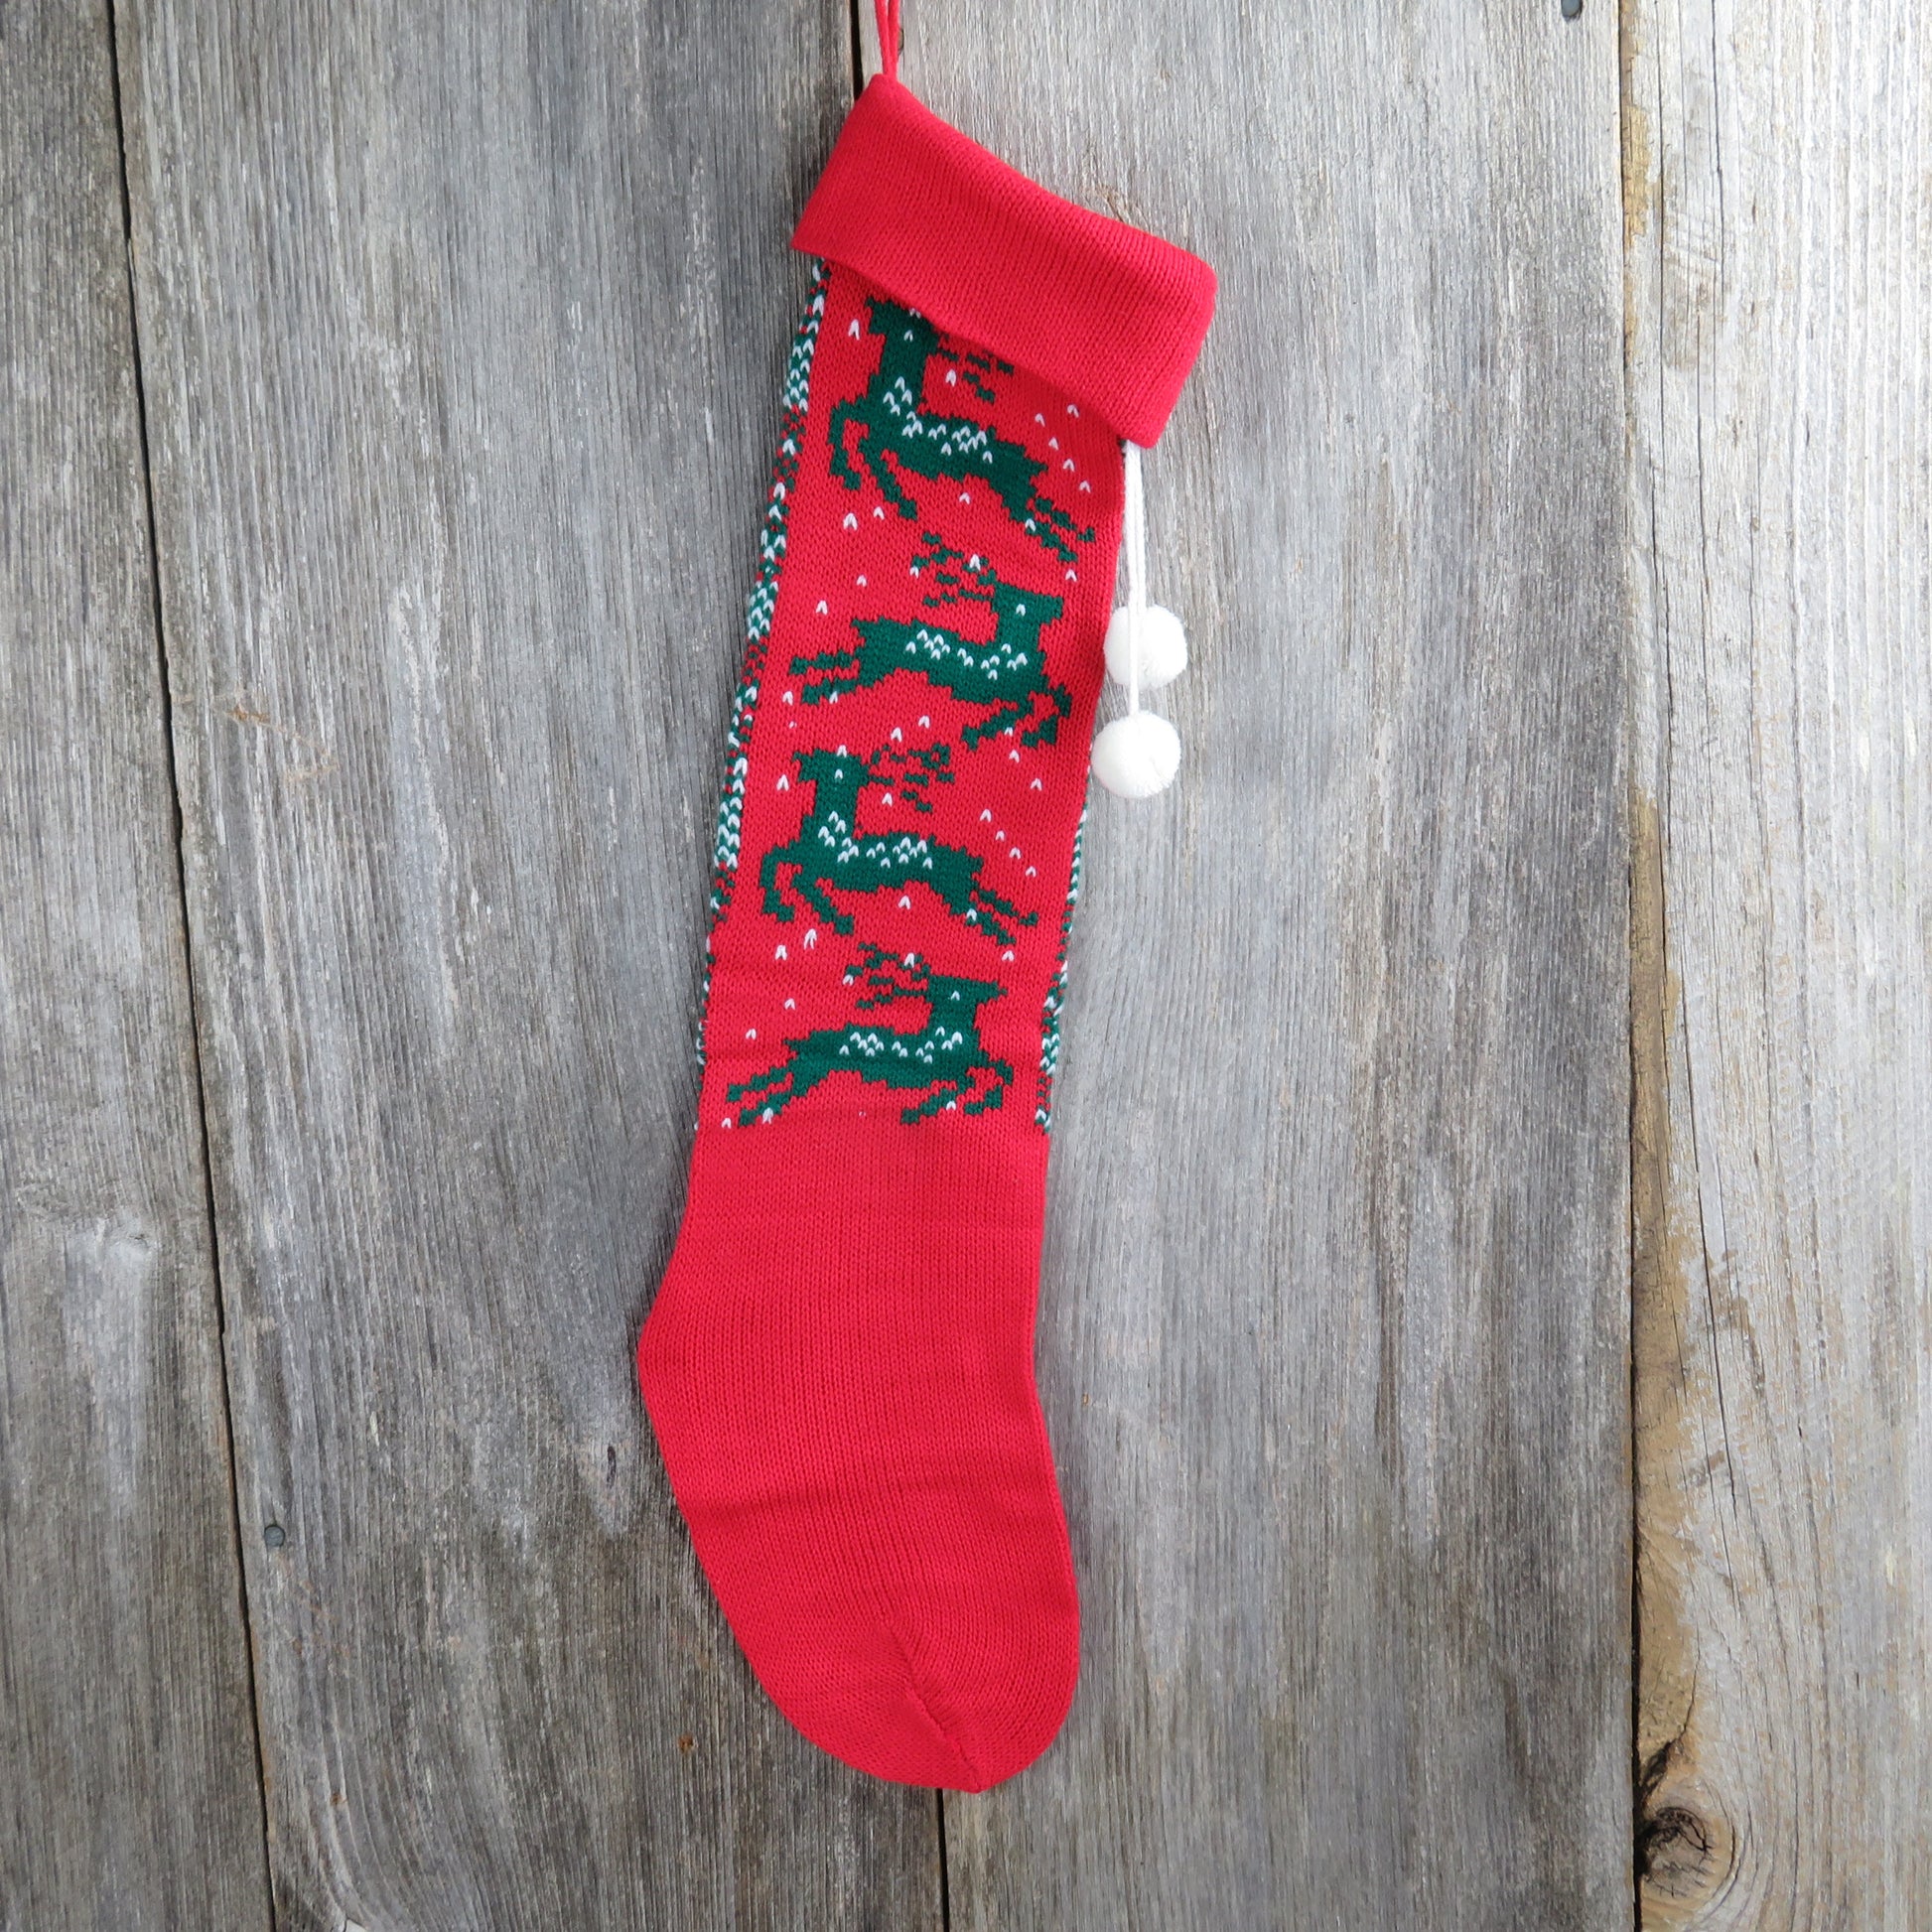 Vintage Reindeer Knit Christmas Stocking Deer Knitted  Red Green White - At Grandma's Table